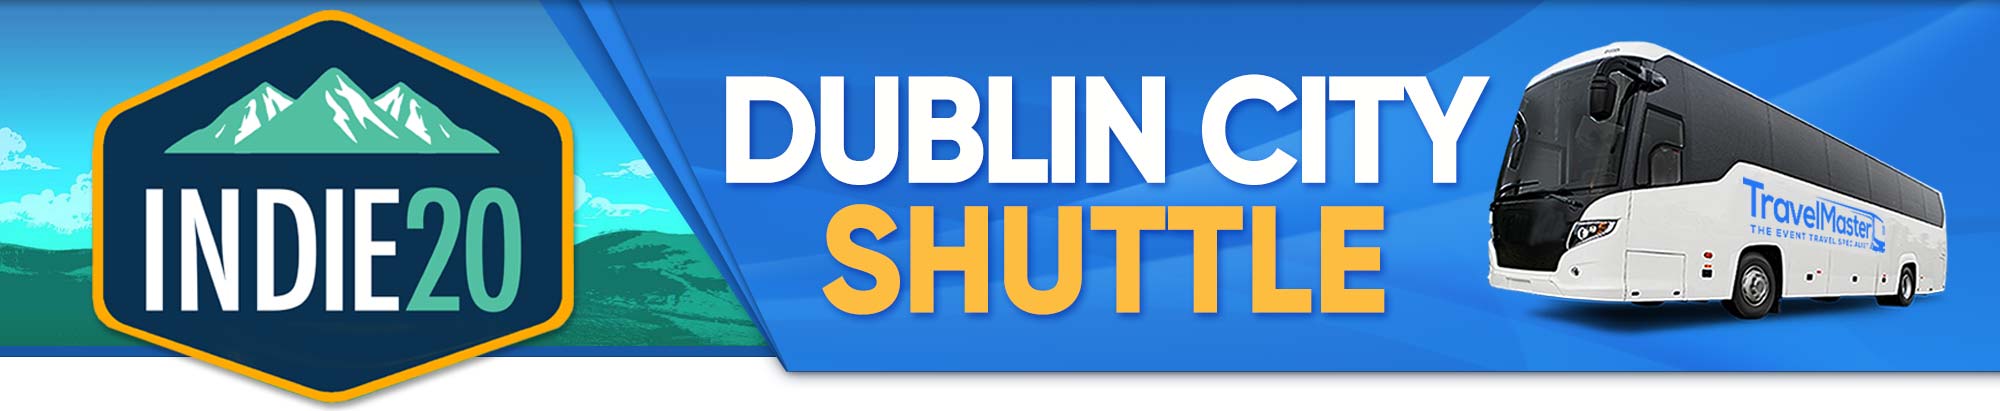 Dublin City Bus to INDIE20 INDIEPENENCE Festival 2020 - Weekend & Daily Bus